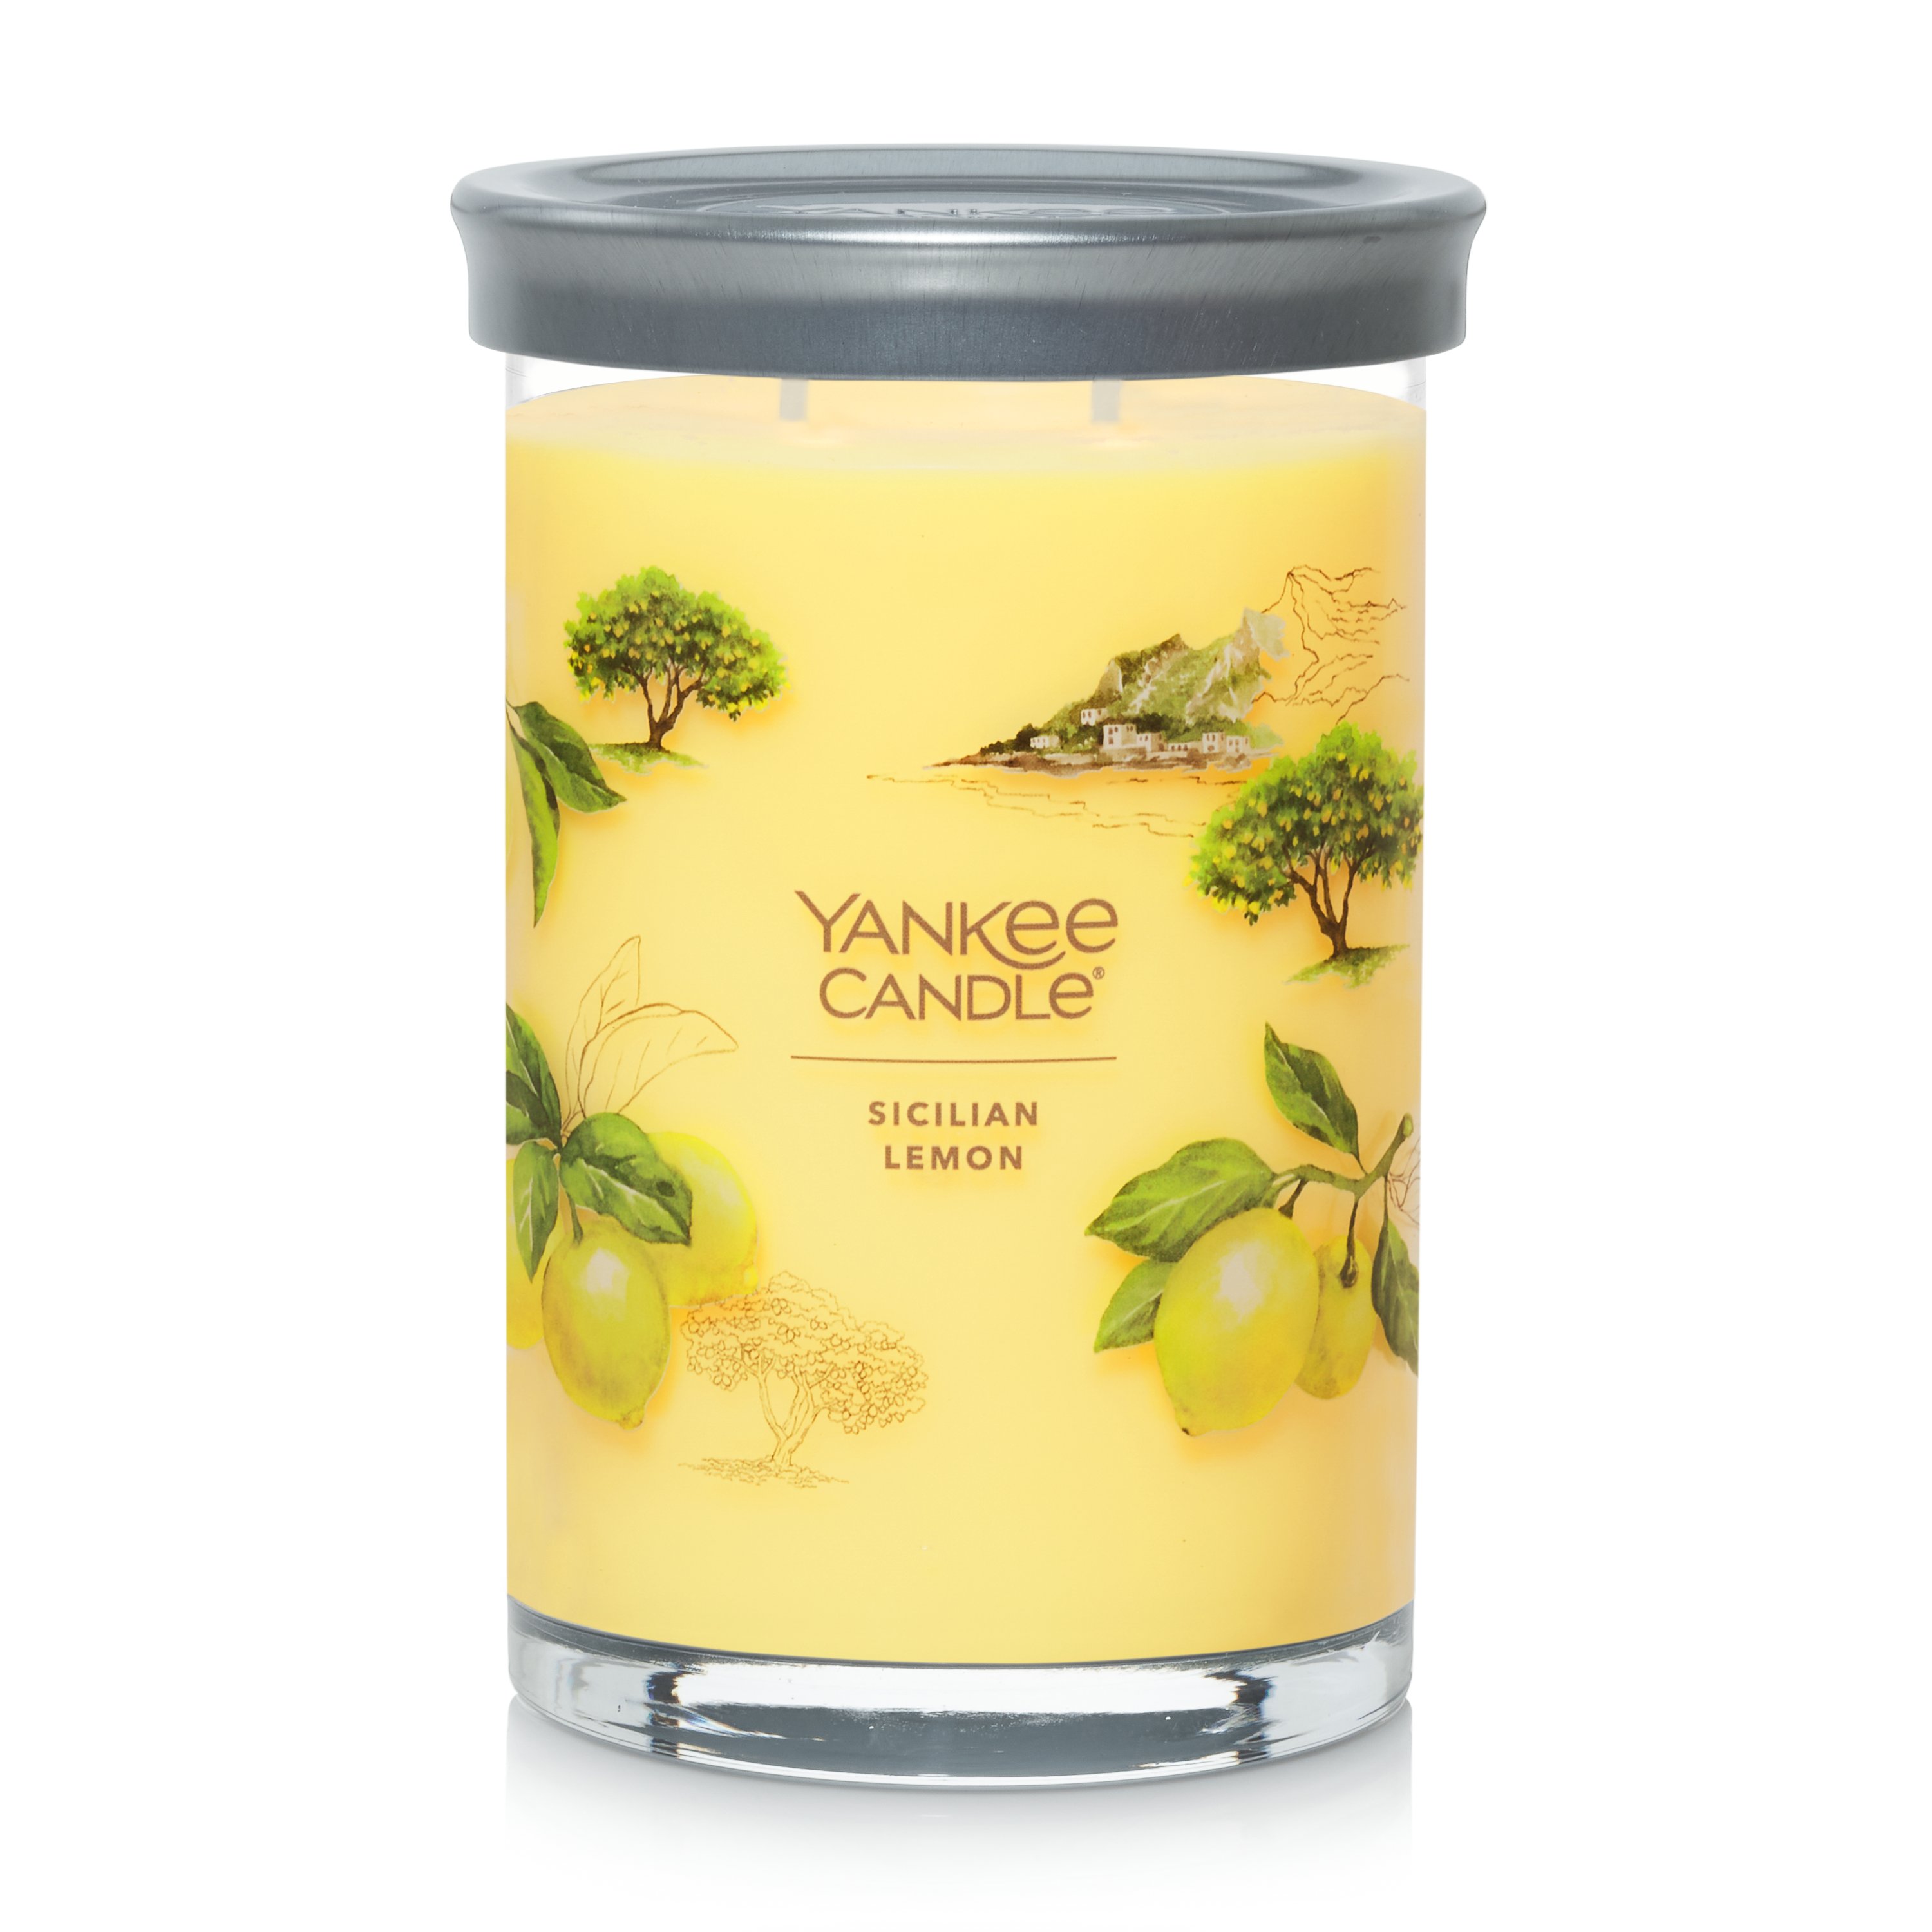  Yankee Candle Sicilian Lemon Scented, Classic 22oz Large Jar  Single Wick Candle, Over 110 Hours of Burn Time : Home & Kitchen